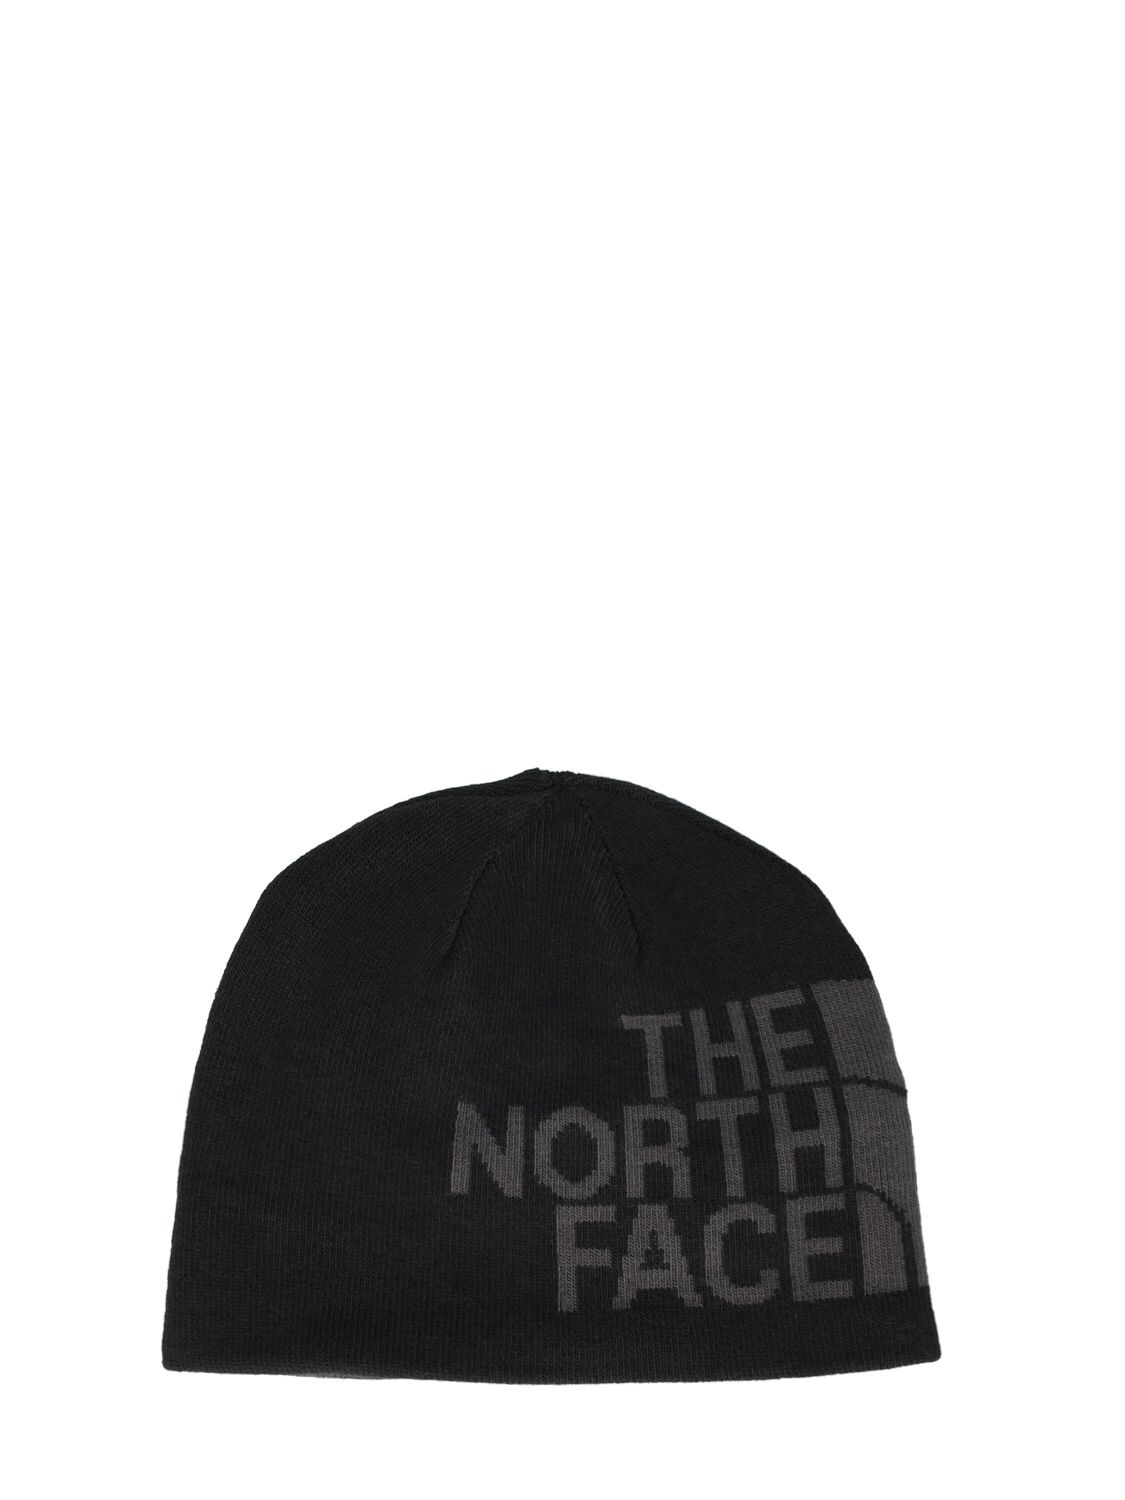 The North ModeSens Beanie Reversible Face In Banner Black,grey | Hat